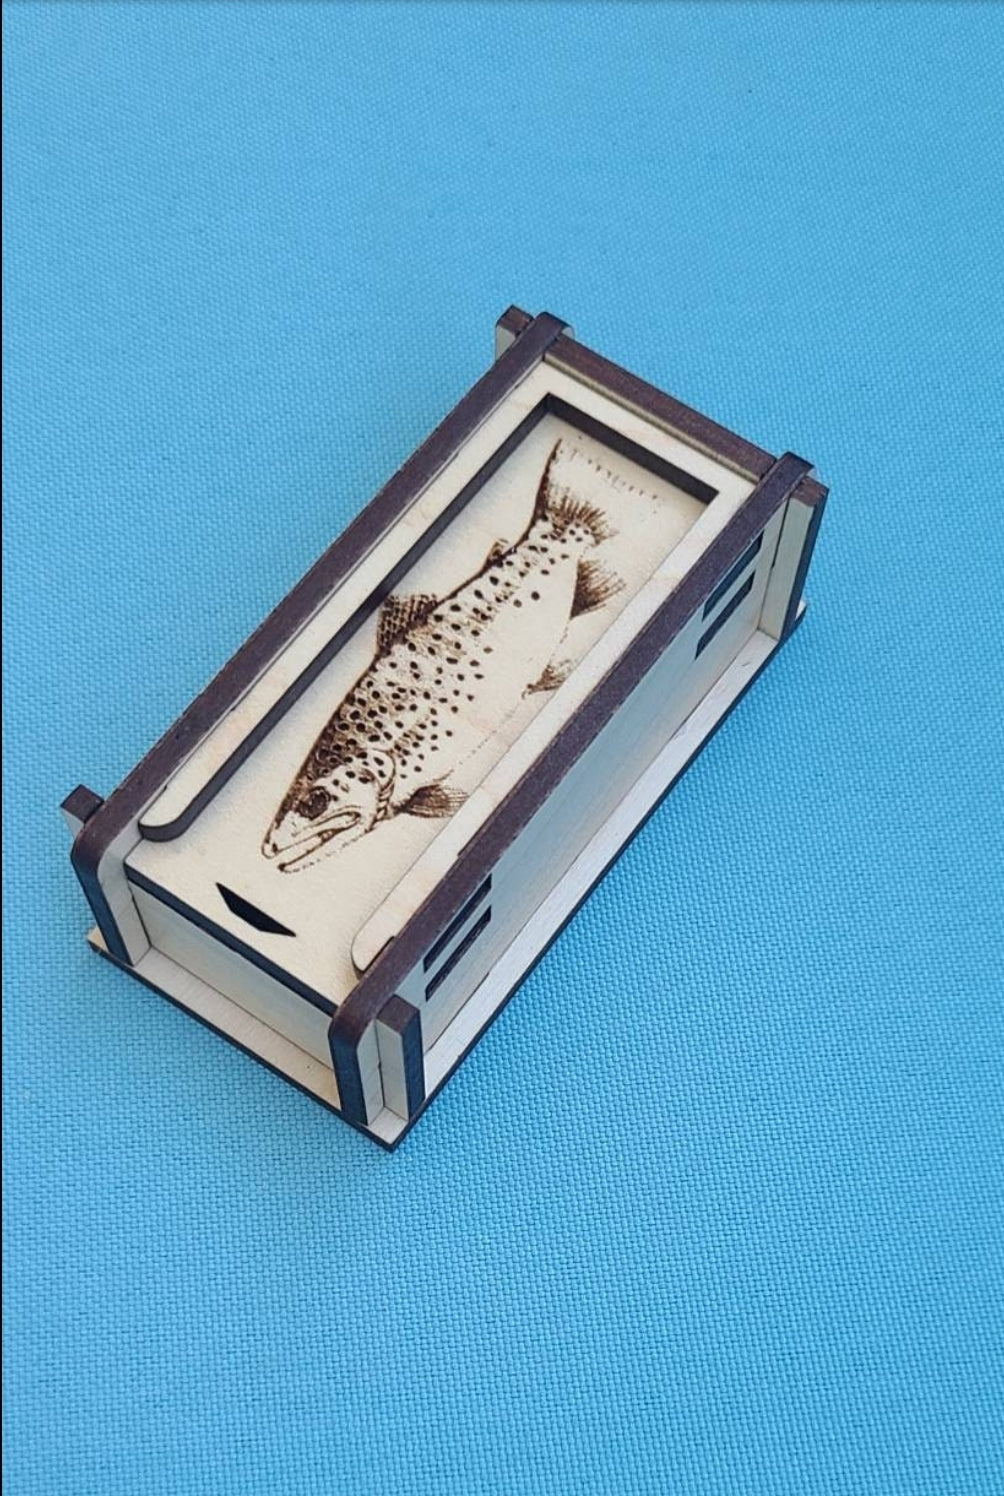 Small Wooden Fly tie box with 5 flies / Fly fishing